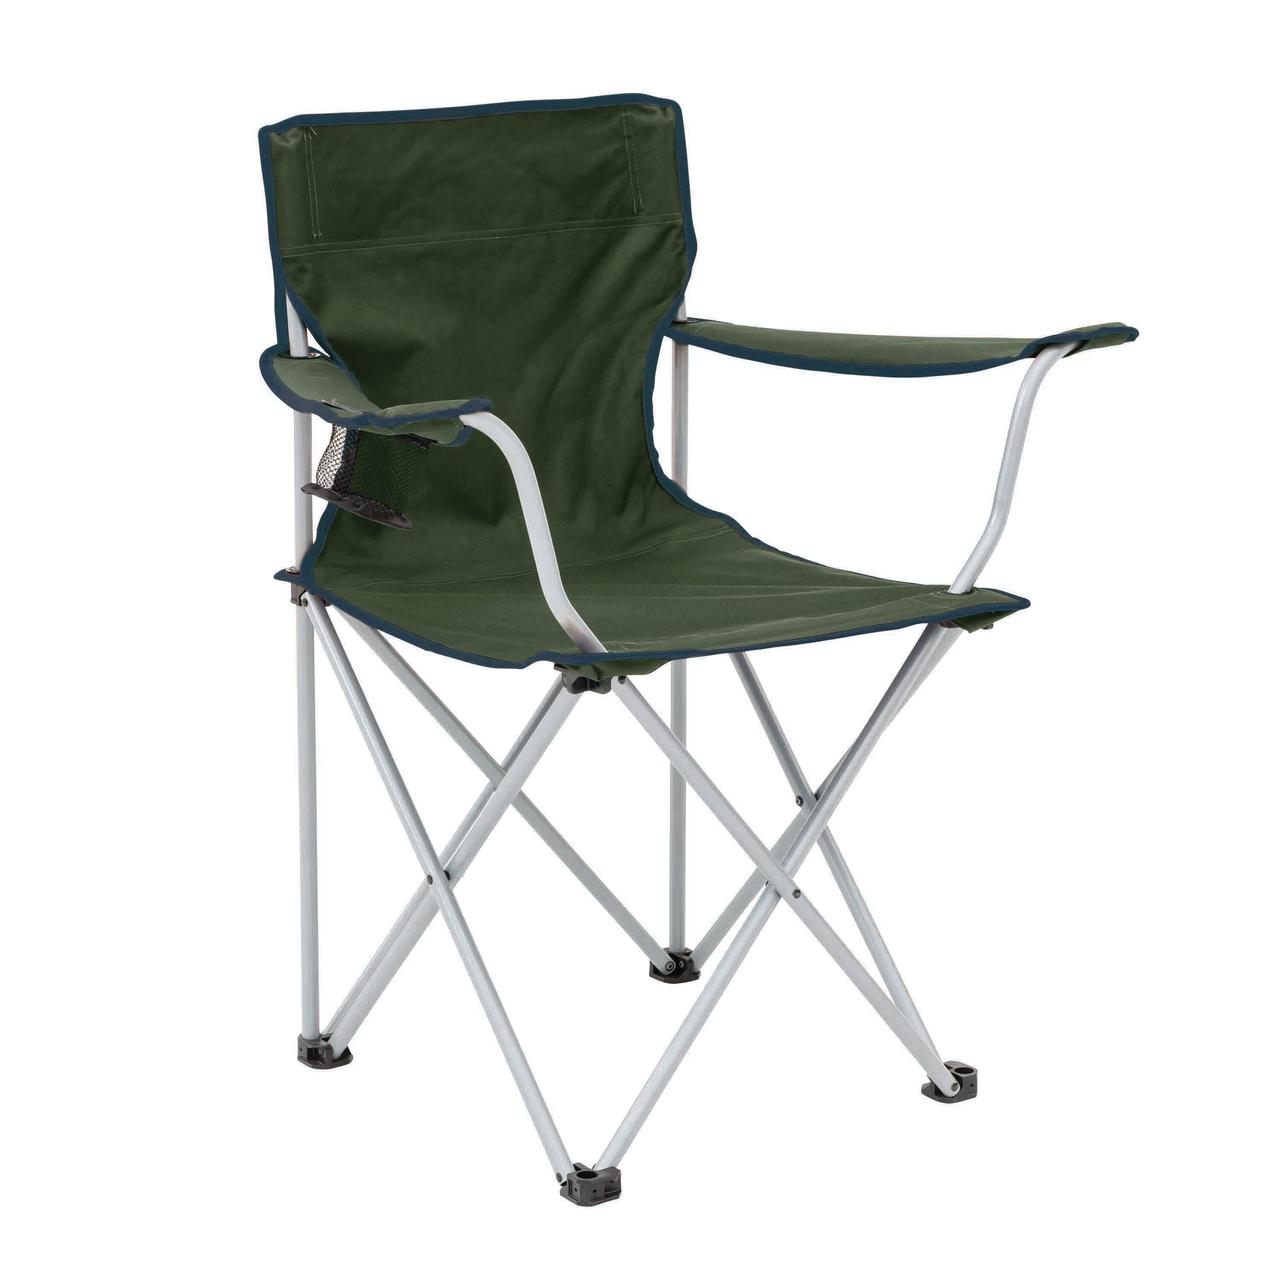 Ozark Trail 6-Piece Camping Combo -Green (Includes tent, chairs, sleeping bags, and table) - image 5 of 8